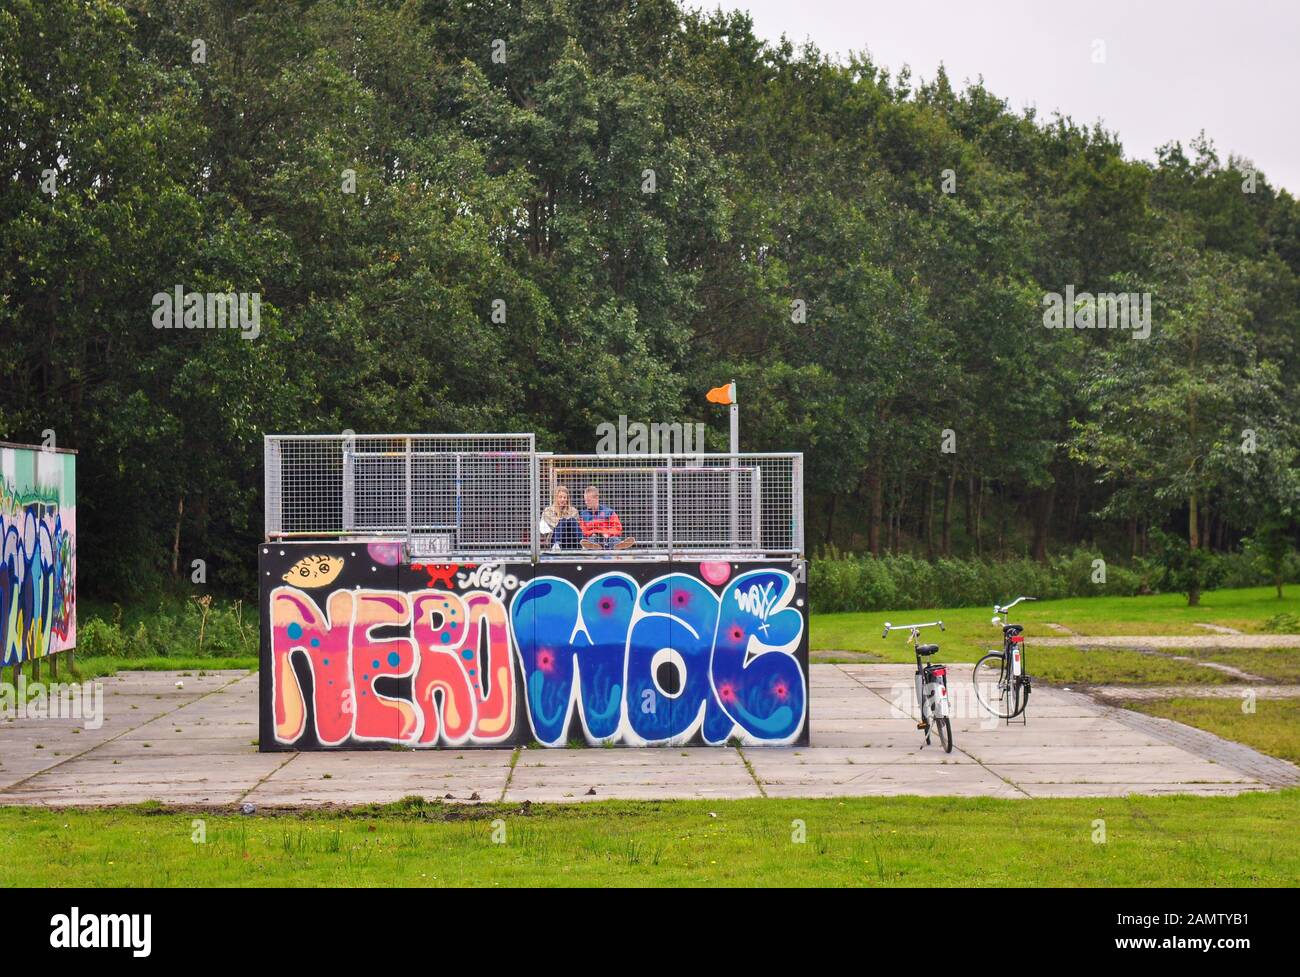 Assen, Netherlands - September 20, 2011: Teenagers with bicycles hang out at a skate ramp in Kloosterveen in Assen in the Netherlands. Stock Photo